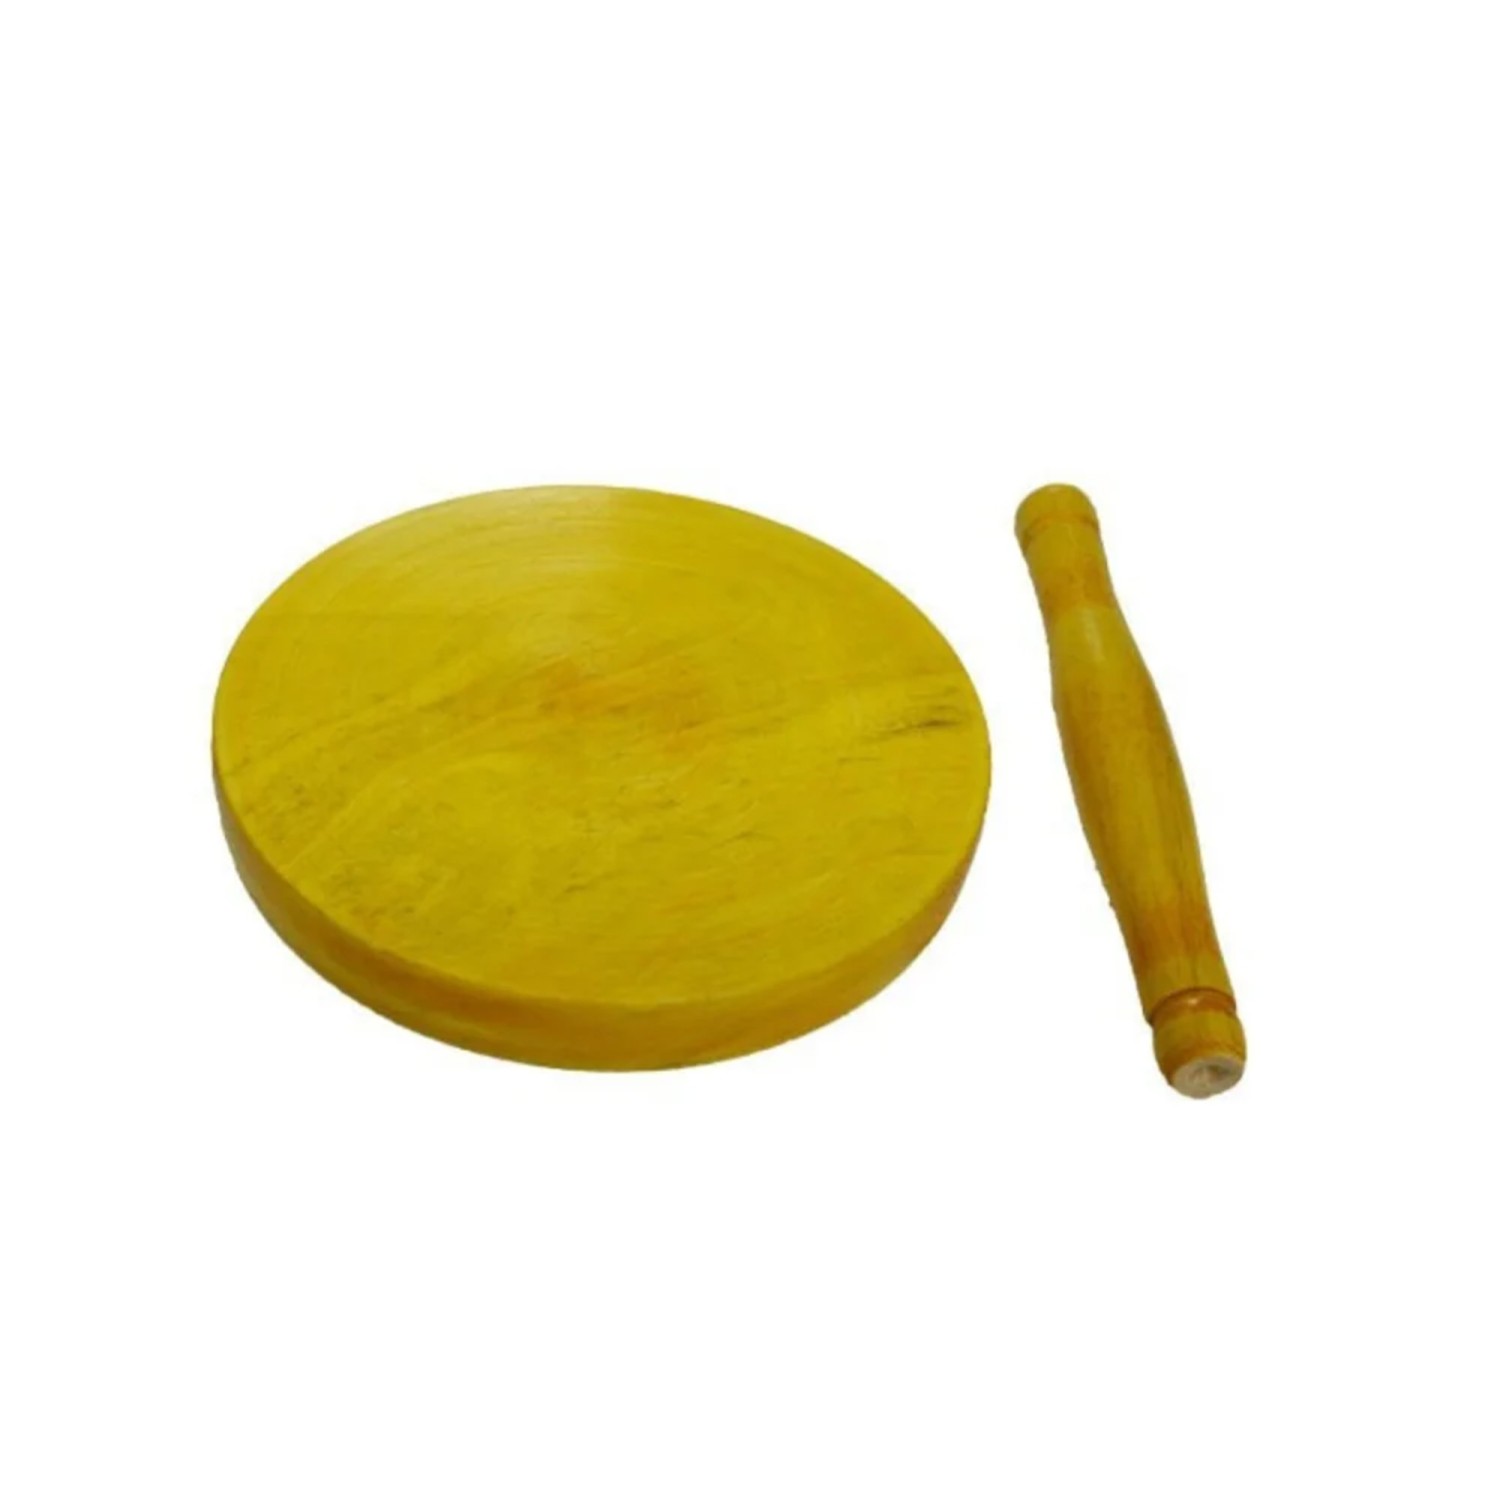 Play dough roller - Yellow Wooden Kitchen Item Rolling Pin Board Roti Maker Toy For Kids & Toddlers